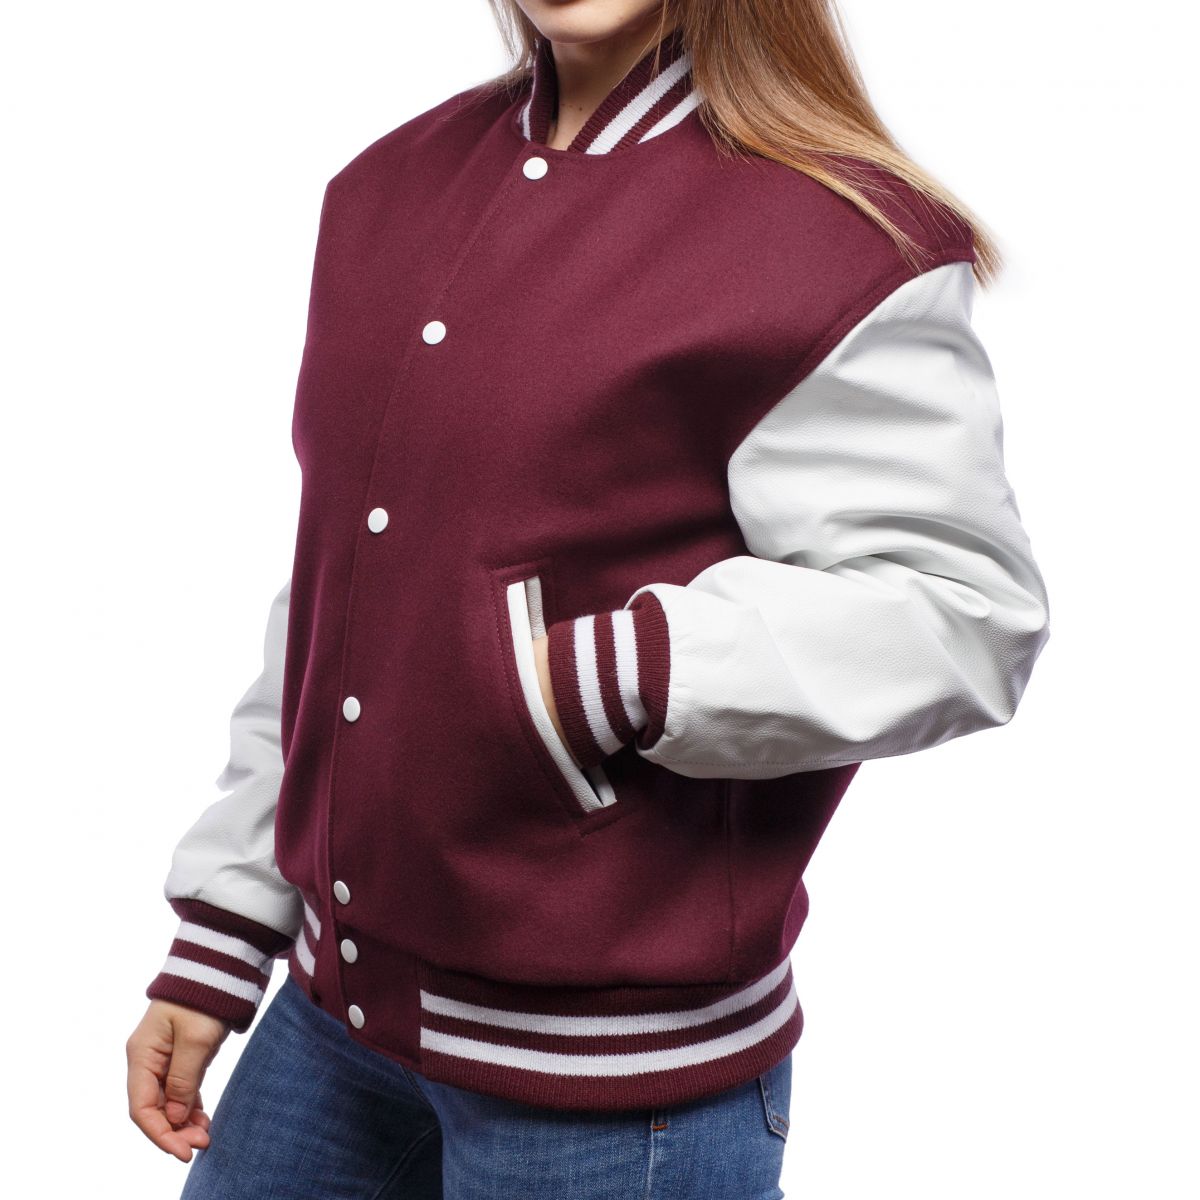 Maroon Wool Body & Bright White Leather Jacket